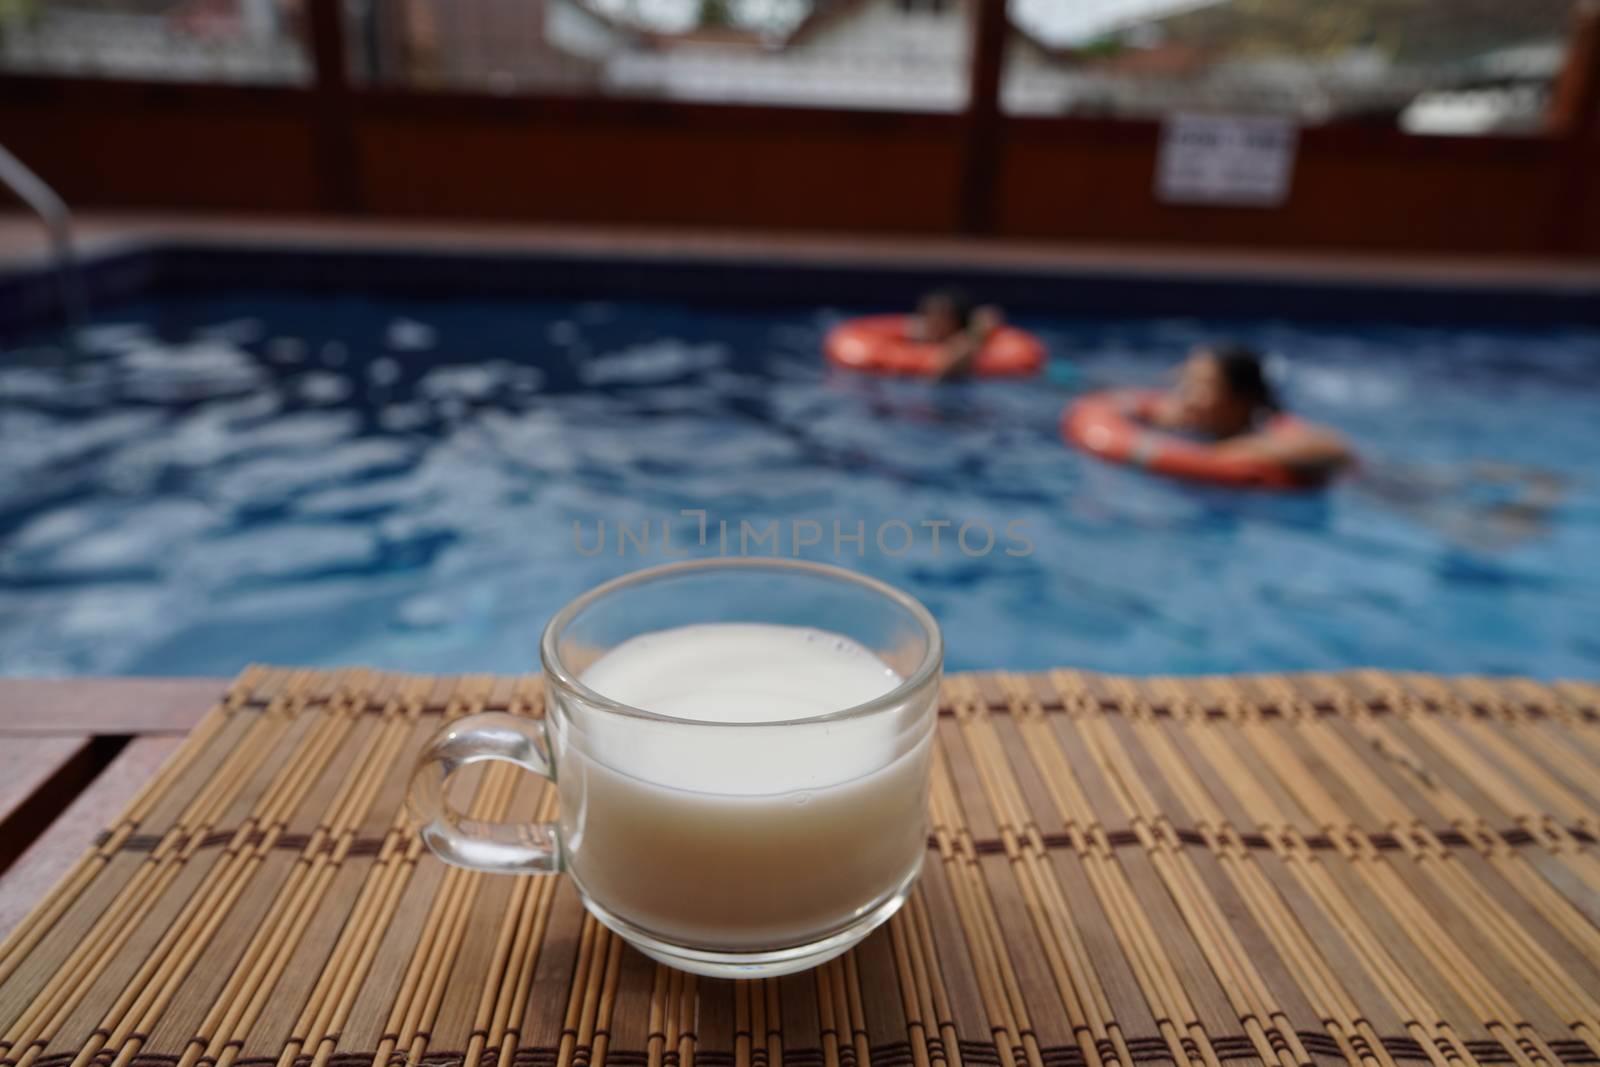 A cup of hot latte coffee is beside the pool in the house.